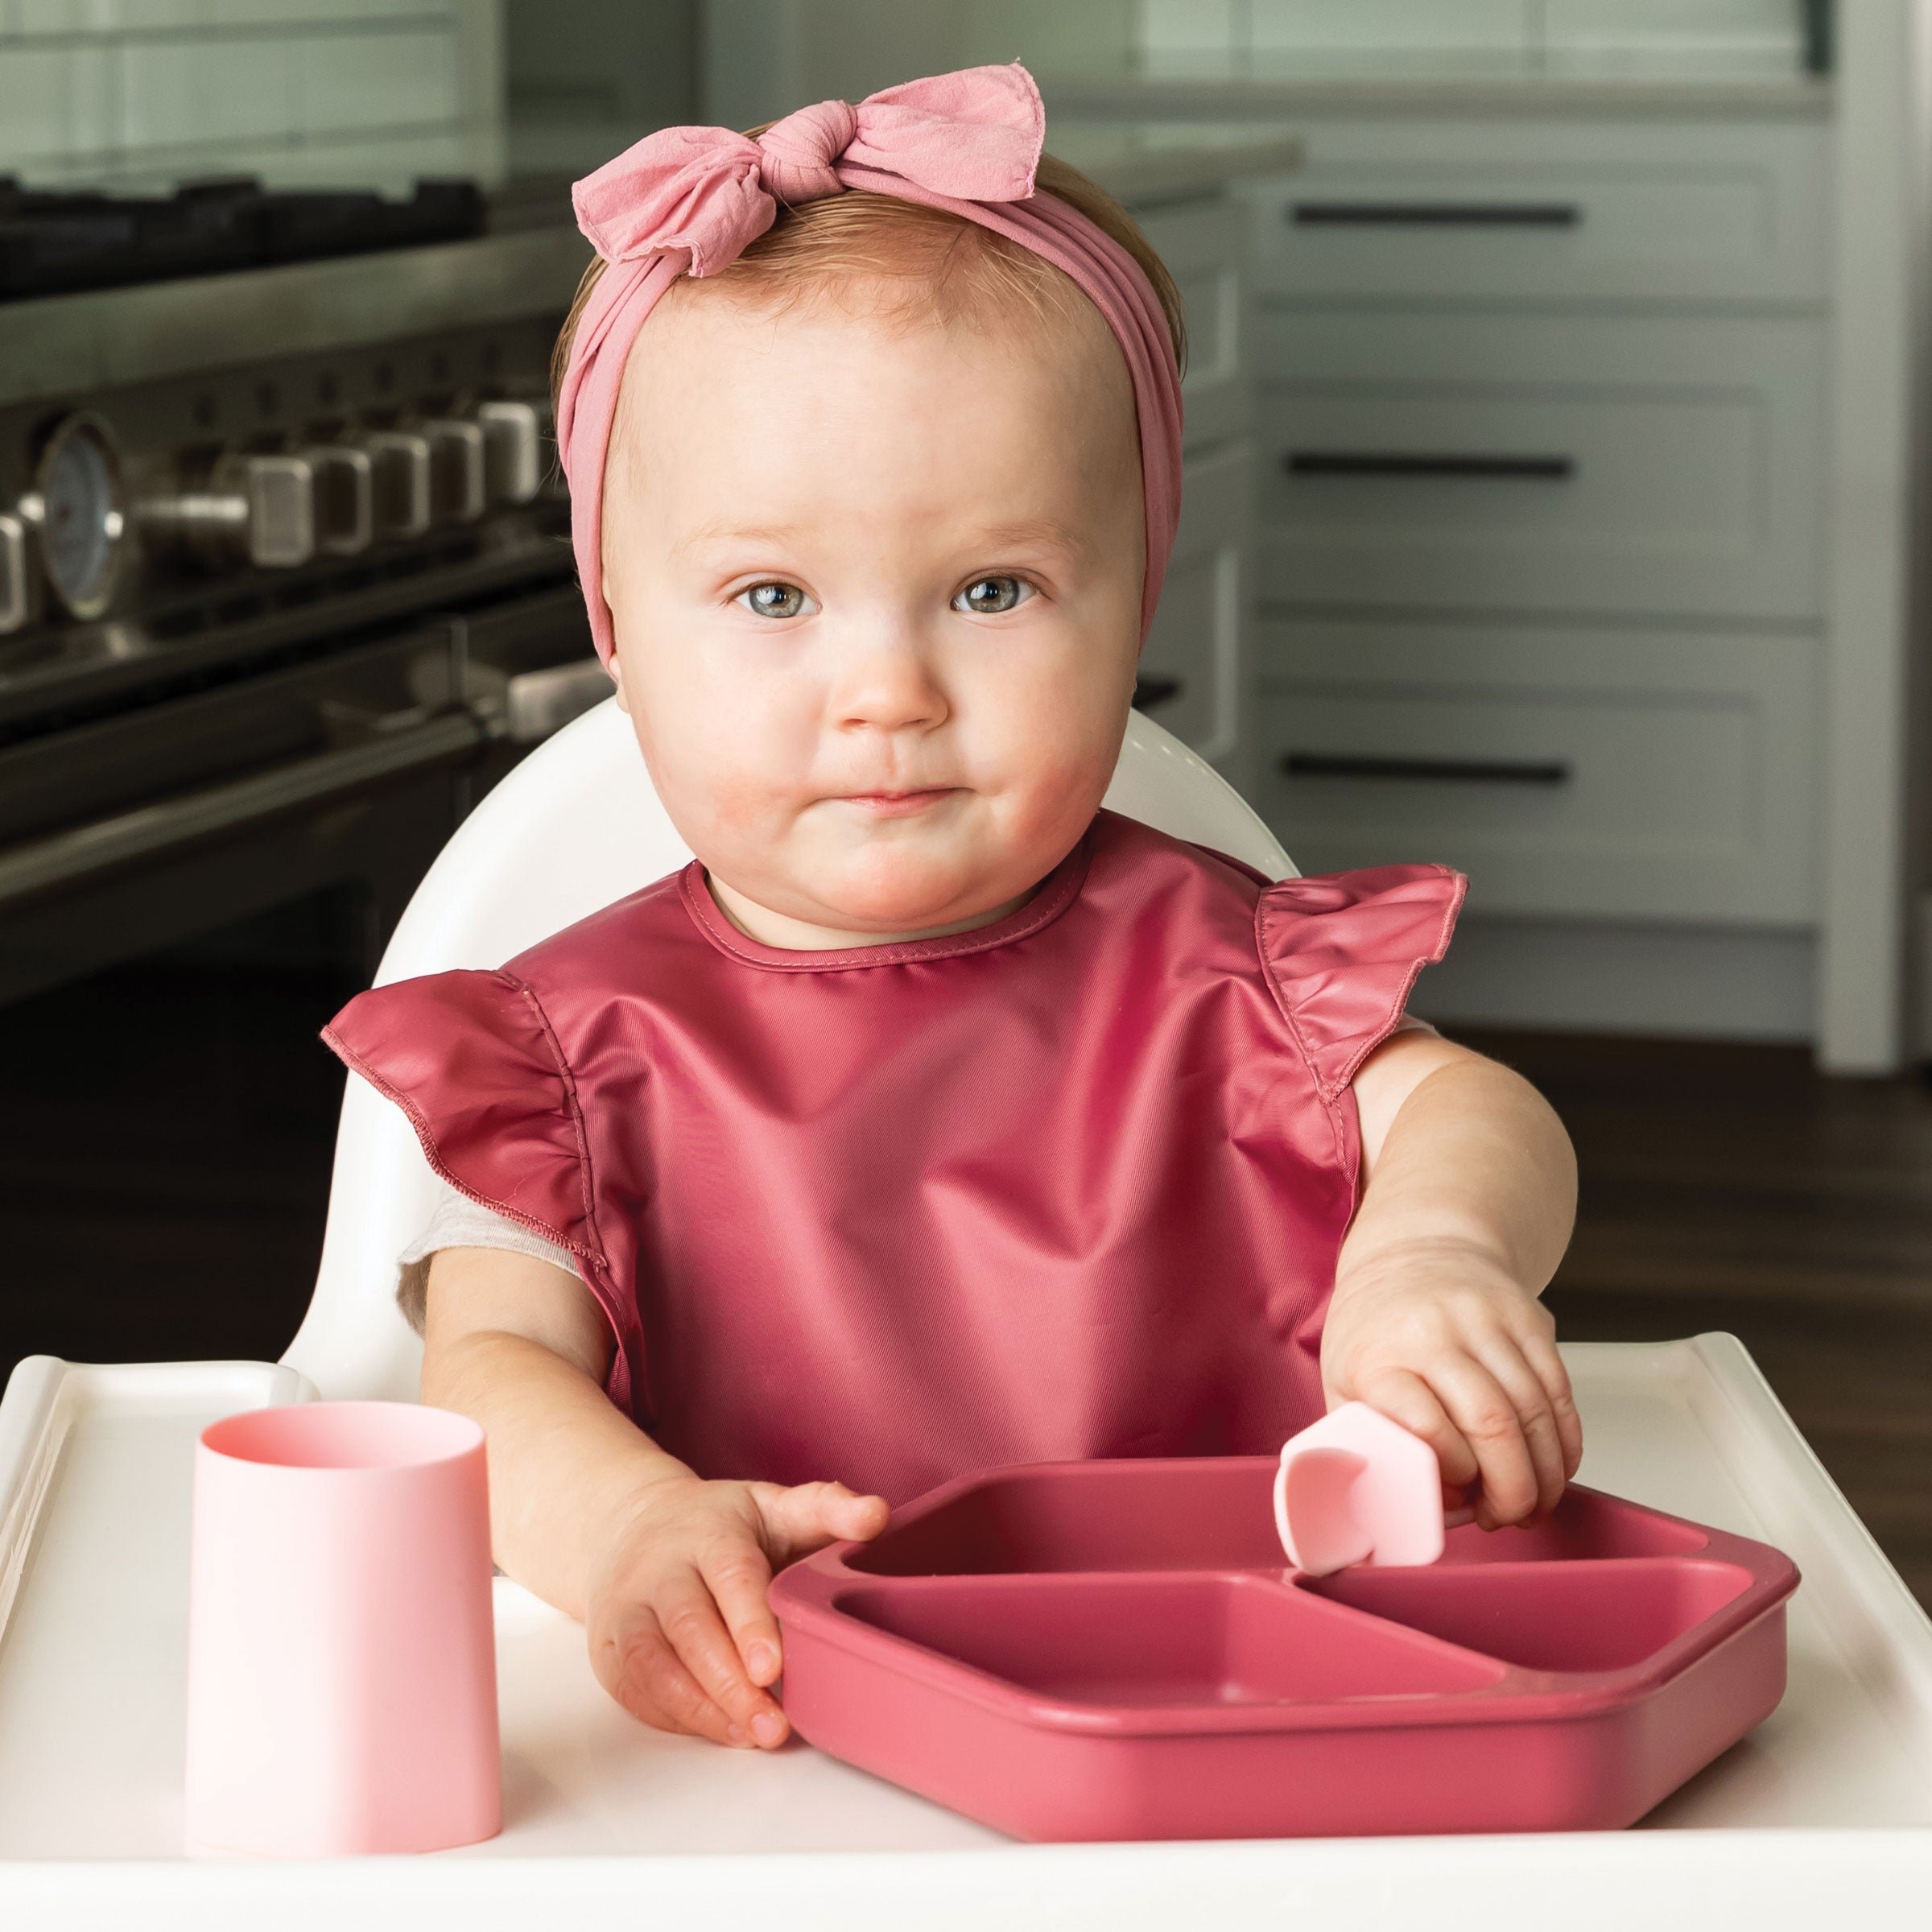 Tiny Twinkle - Silicone Plate and Lid Set - Burgundy